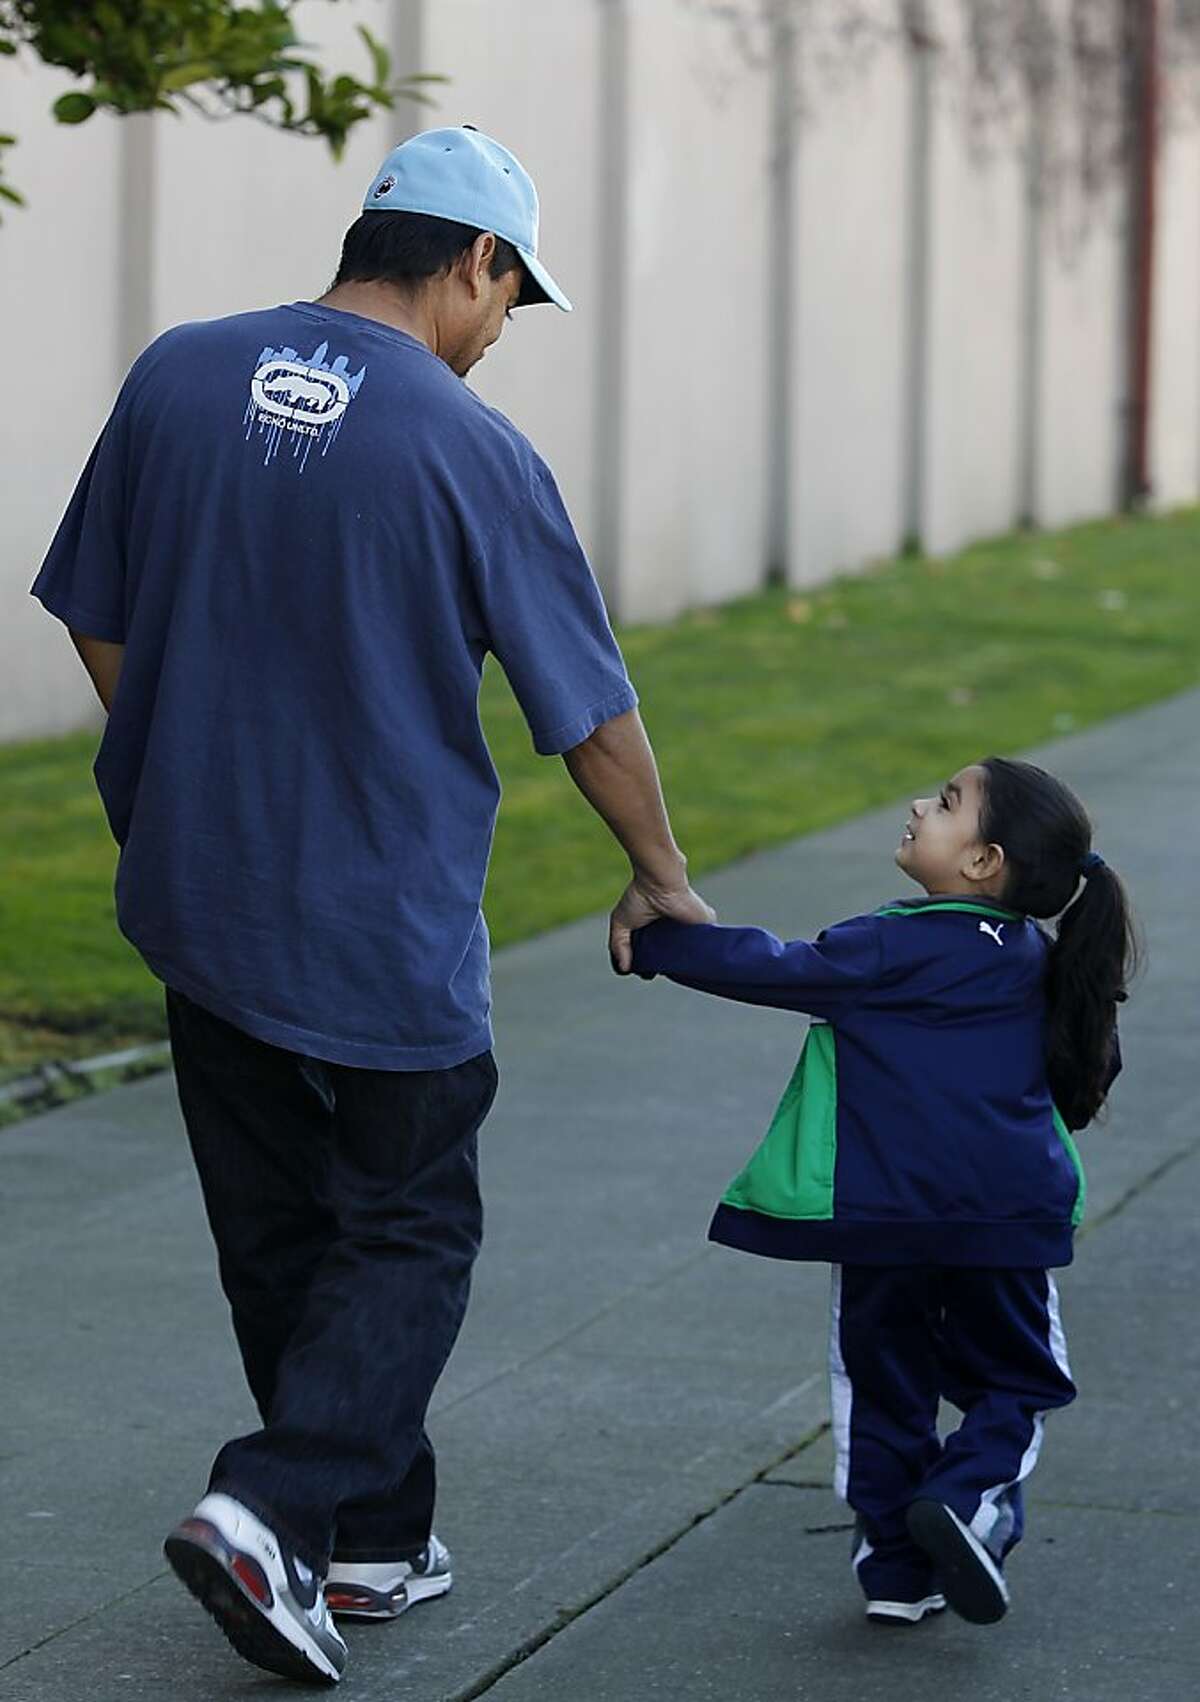 Jesus Navarro walks with his 3-year-old daughter Karin Jacquelin after discussing his need for a kidney transplant in Berkeley, Calif. on Thursday, Feb. 9, 2012. However, Navarro's immigration status may create complications in his receiving publicly-assisted post-op medical care.